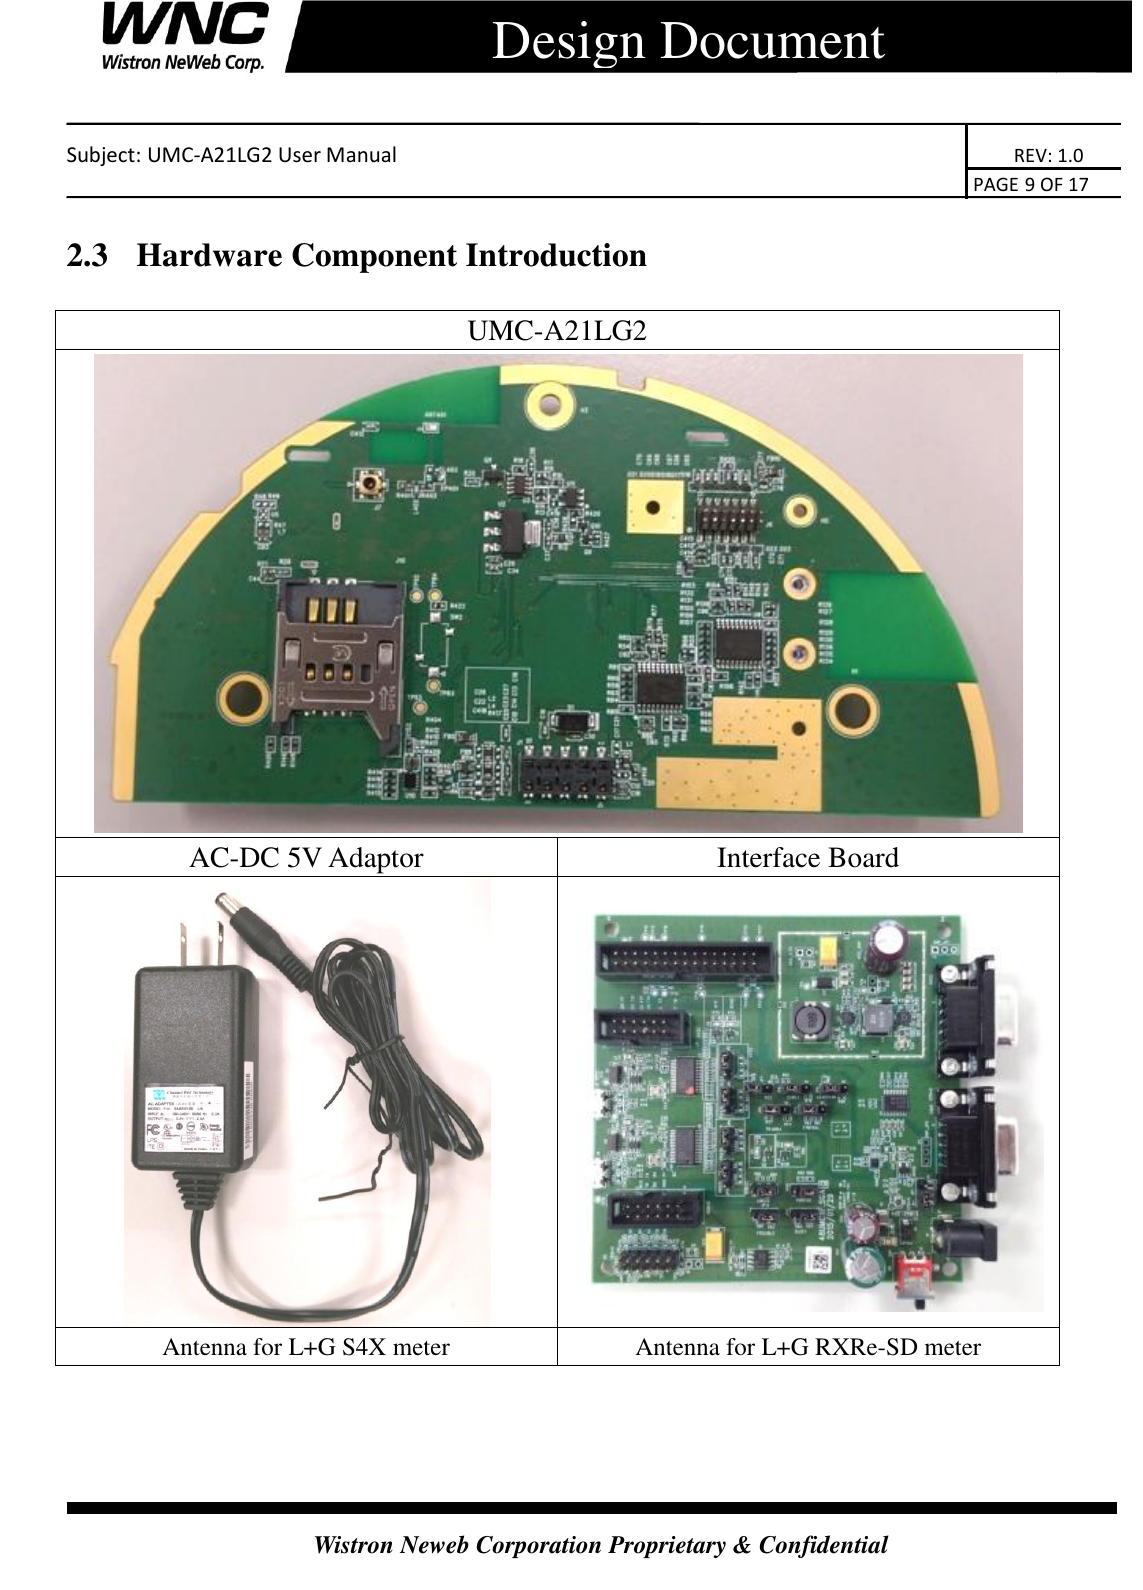    Subject: UMC-A21LG2 User Manual                                                                      REV: 1.0                                                                                        PAGE 9 OF 17  Wistron Neweb Corporation Proprietary &amp; Confidential      Design Document 2.3   Hardware Component Introduction UMC-A21LG2  AC-DC 5V Adaptor Interface Board   Antenna for L+G S4X meter Antenna for L+G RXRe-SD meter 